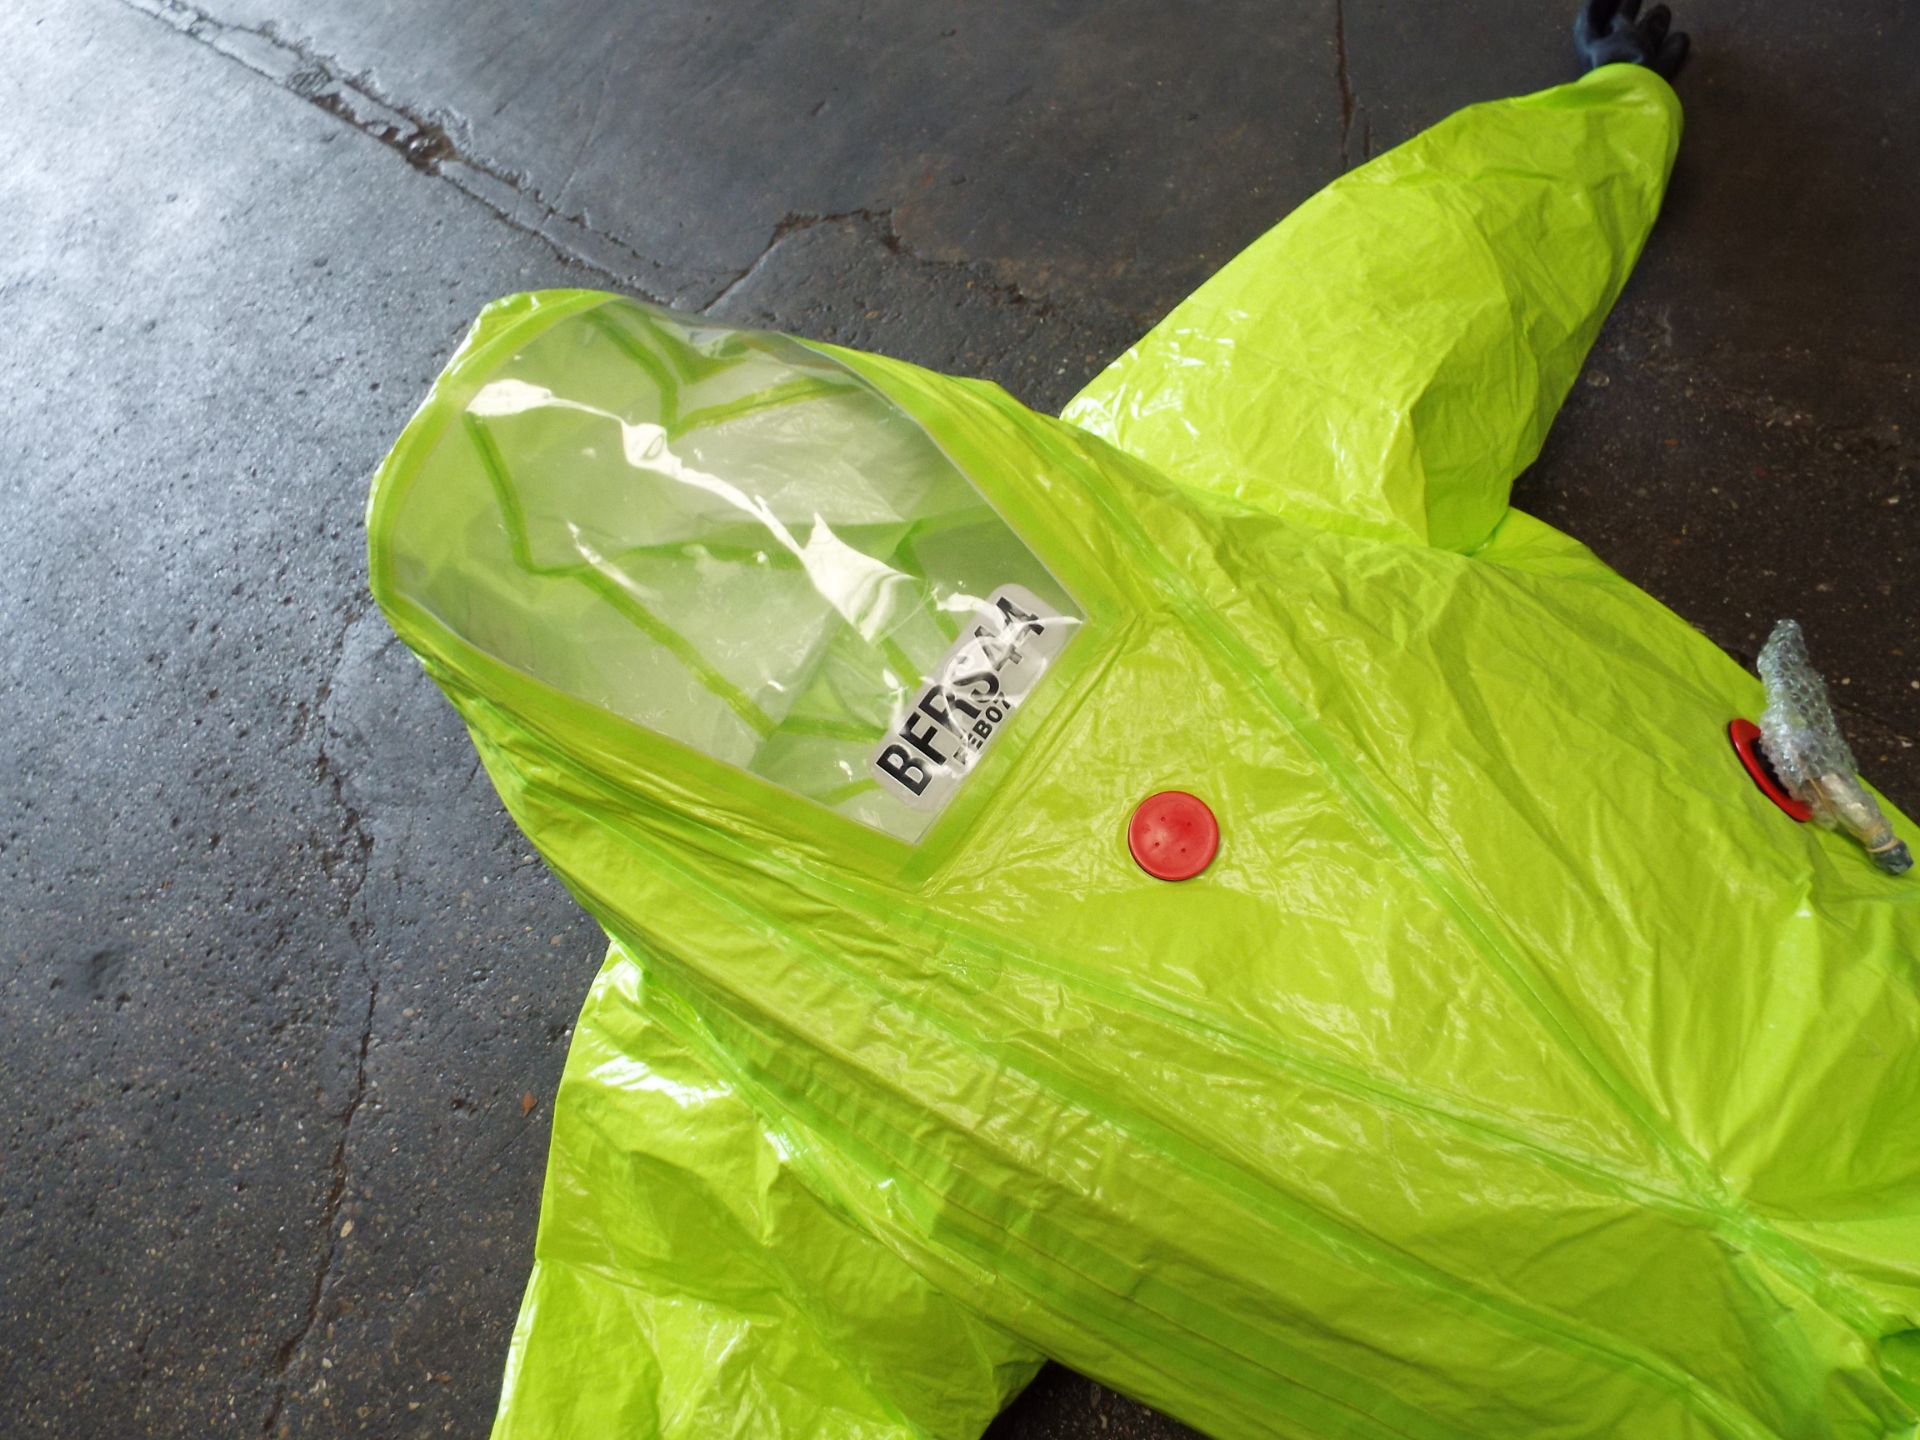 Respirex Tychem TK Gas-Tight Hazmat Suit Type 1A with Attached Boots and Gloves - Bild 6 aus 15